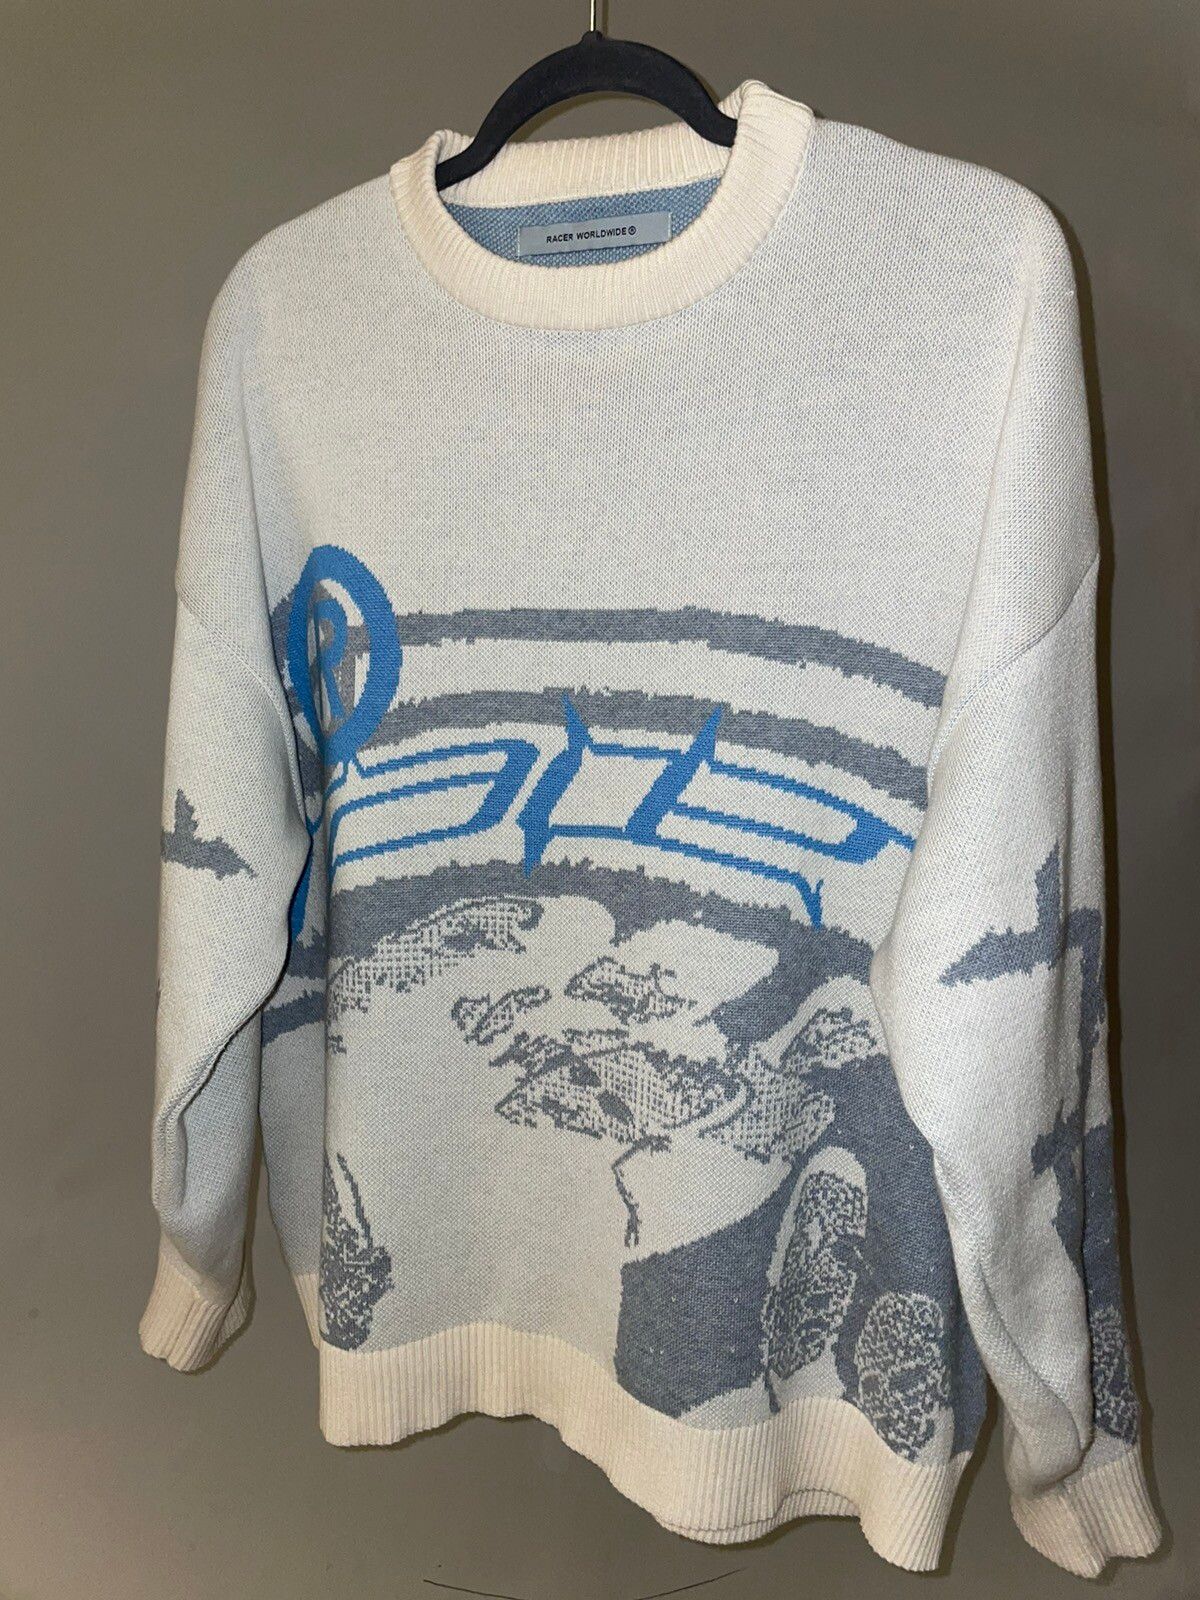 Vintage RACER WORLDWIDE “ICE” Knit Sweater Size US L / EU 52-54 / 3 - 1 Preview